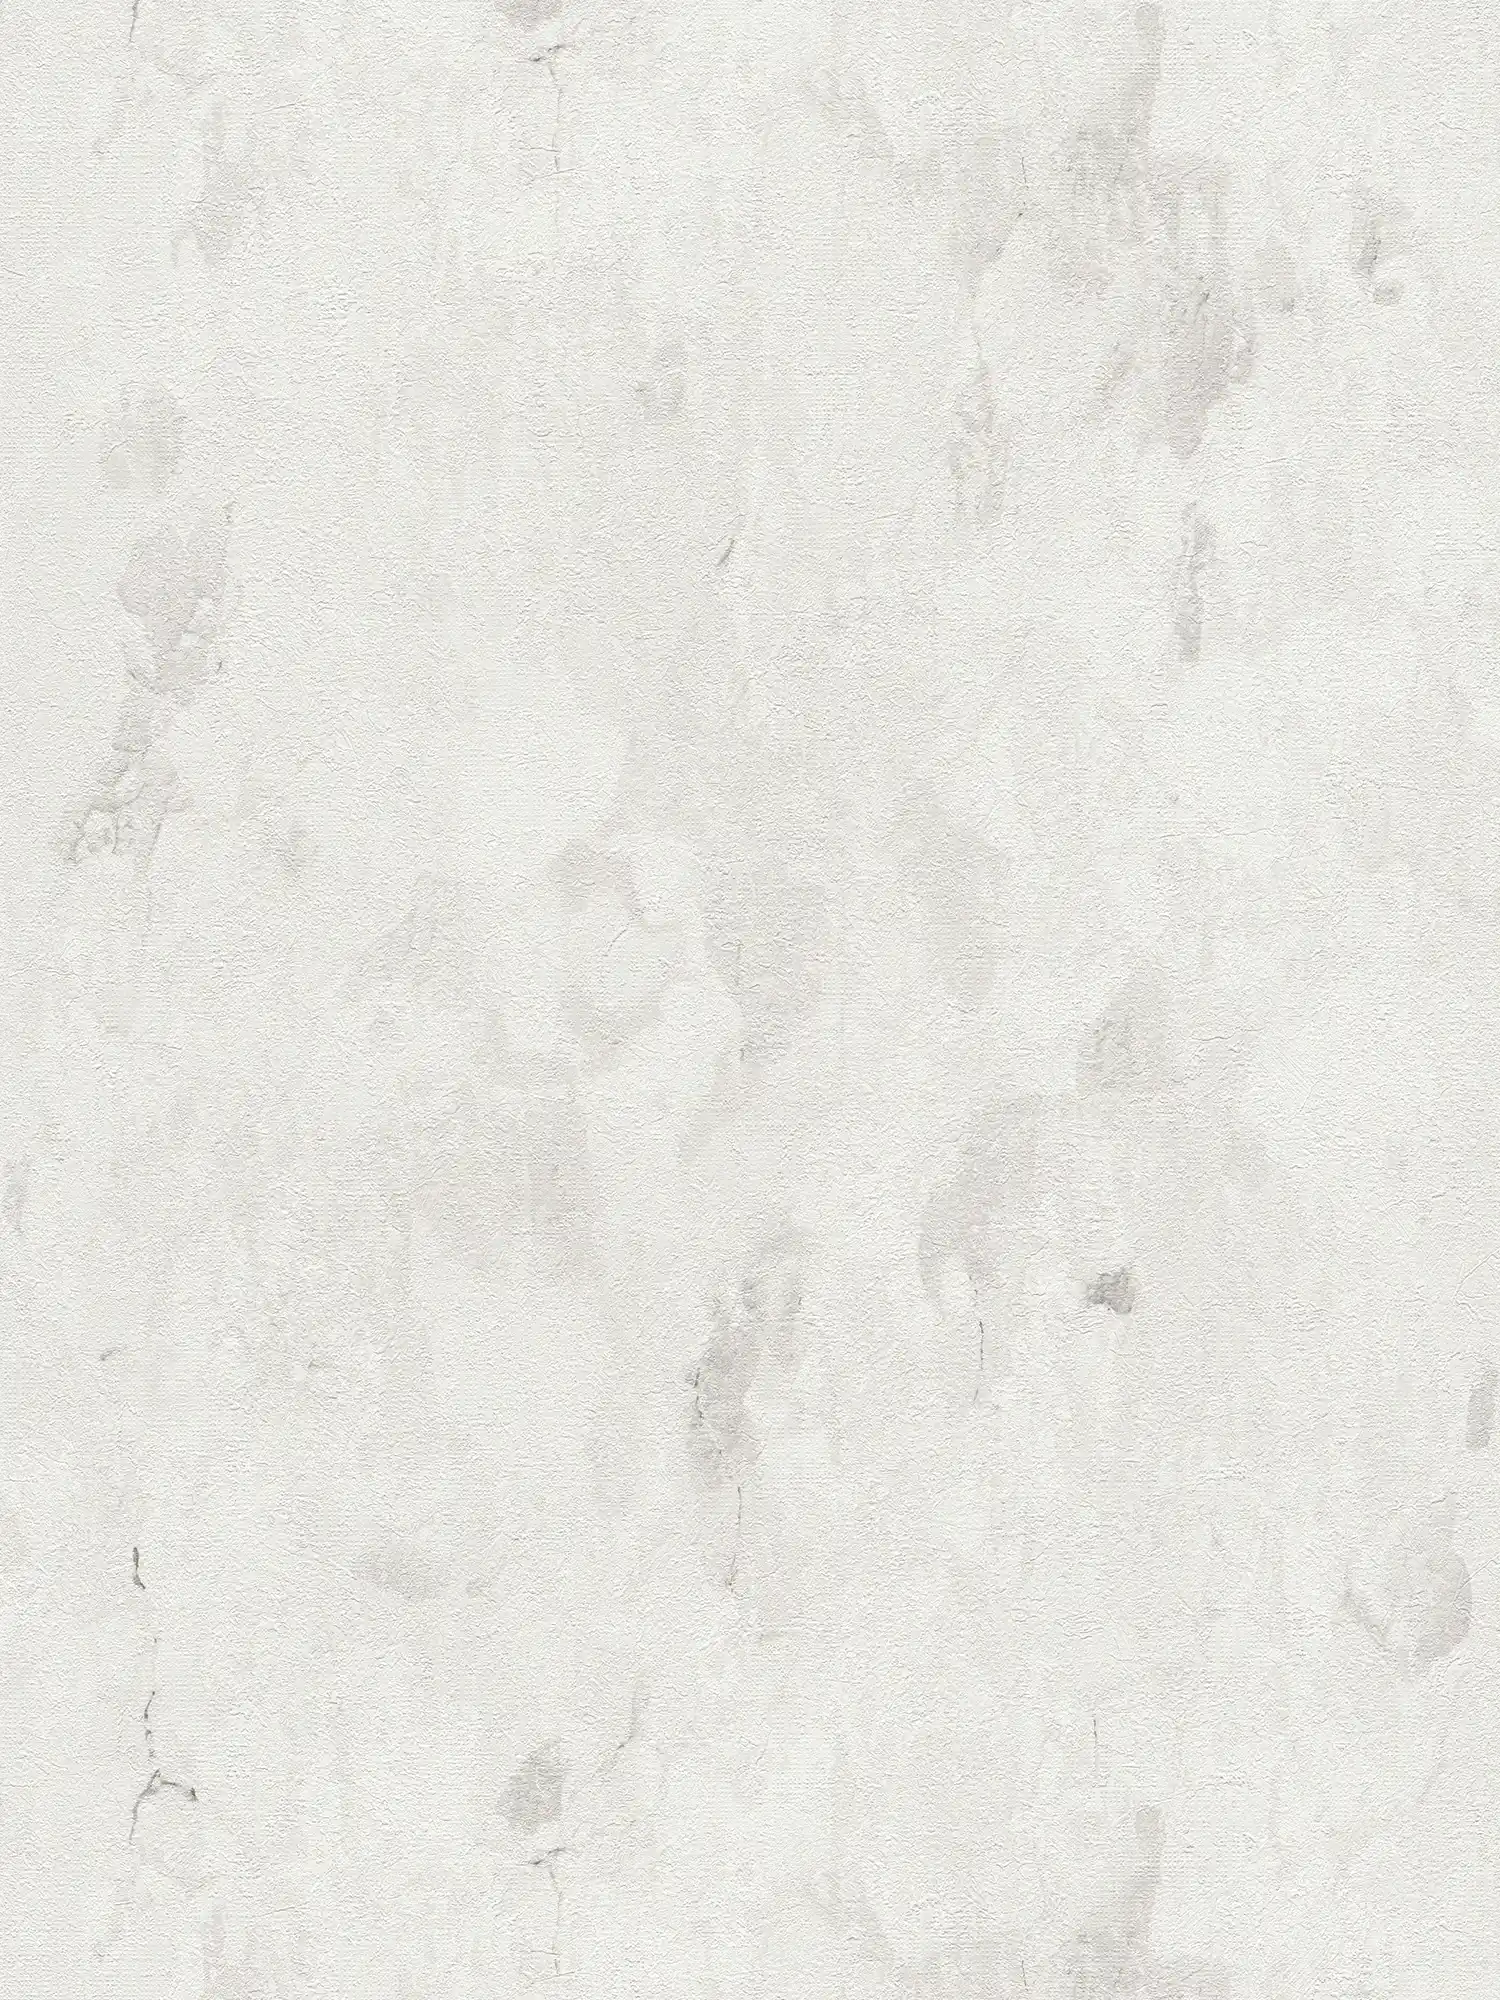         Non-woven wallpaper with rustic design in used look - cream, grey, white
    